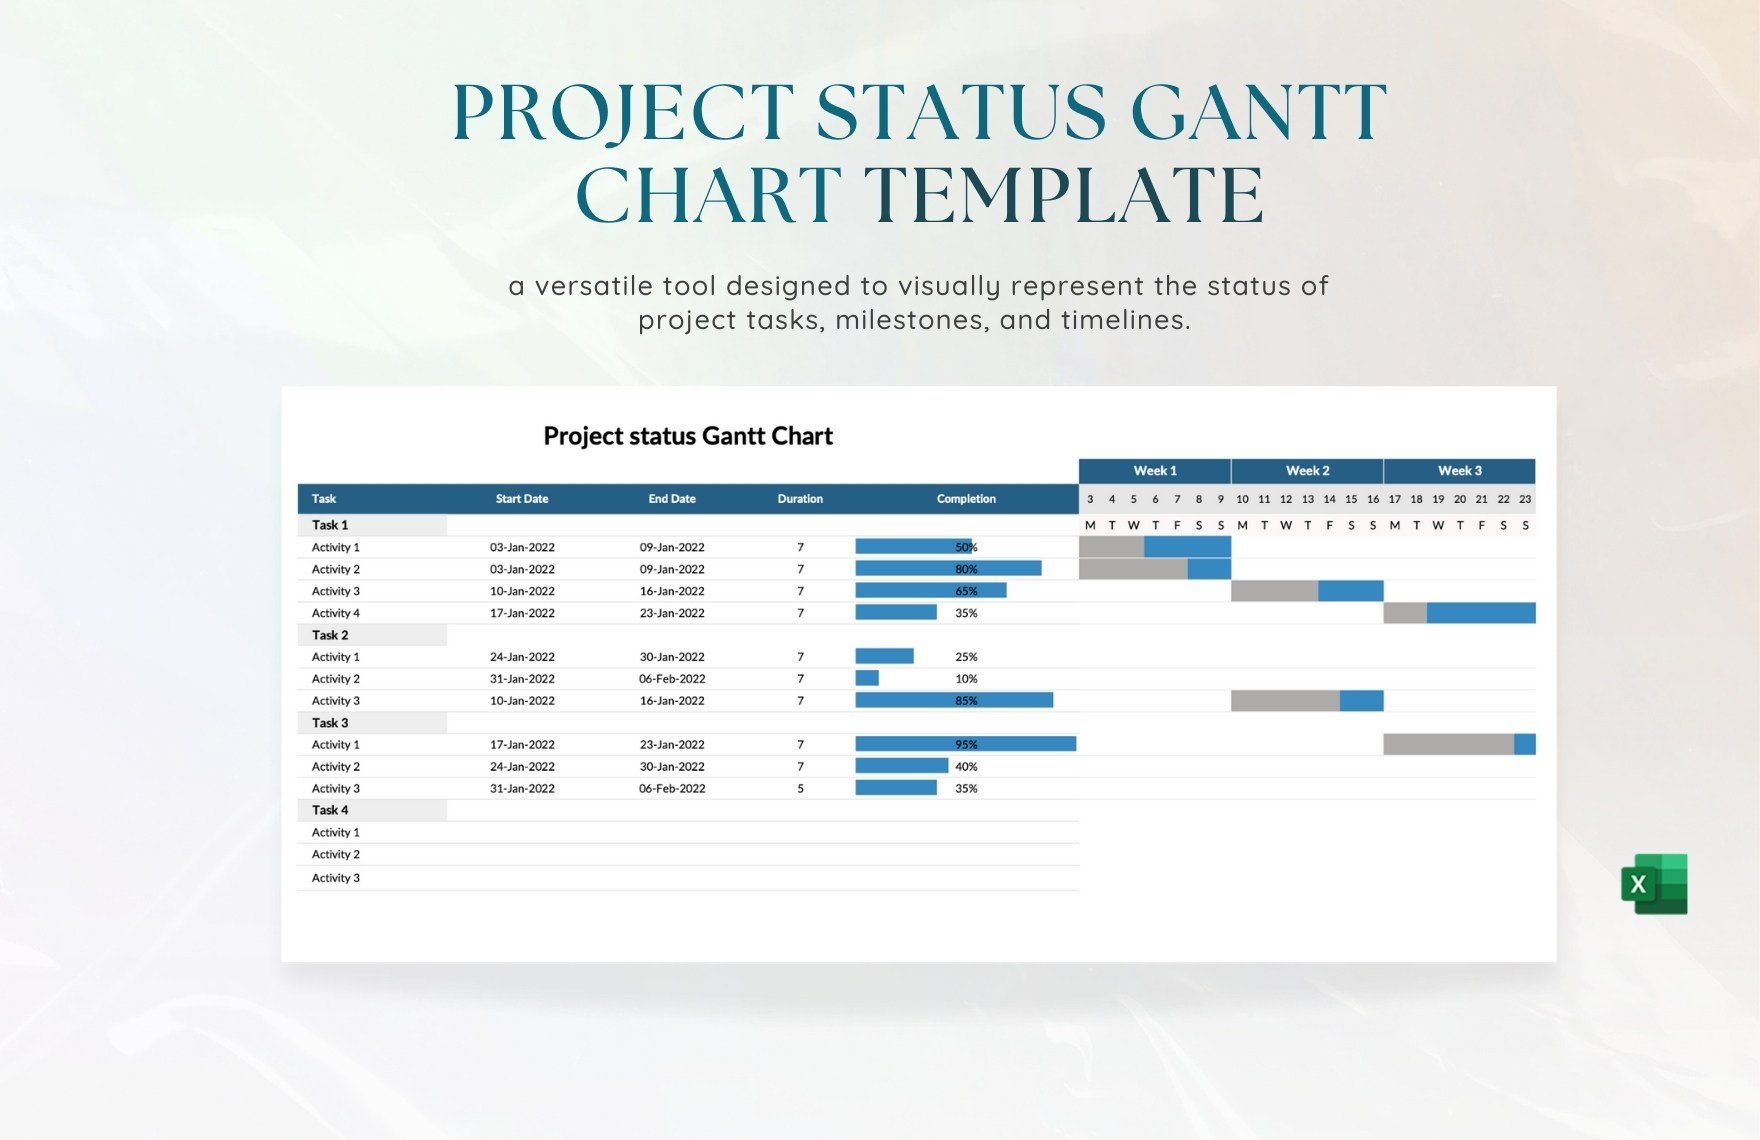 Project Status Gantt Chart Template in Excel